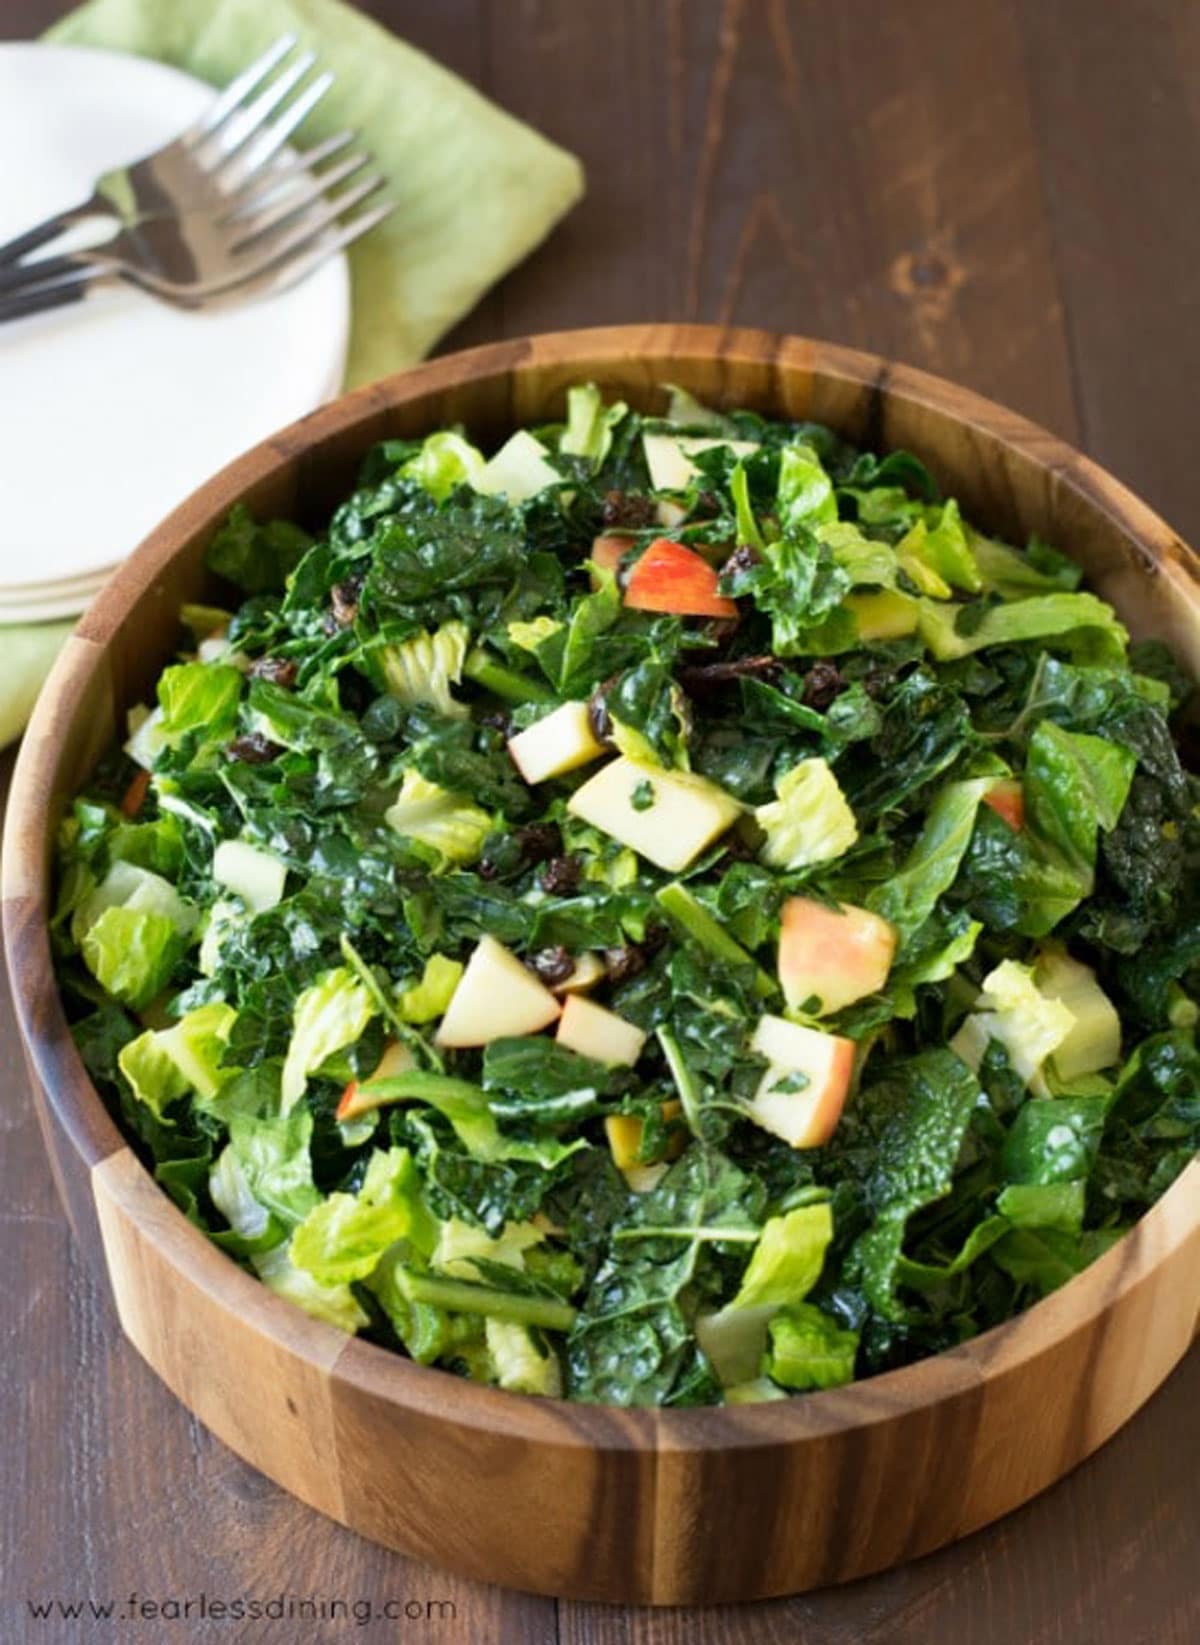 A close up of the kale and apple salad in a wooden bowl.